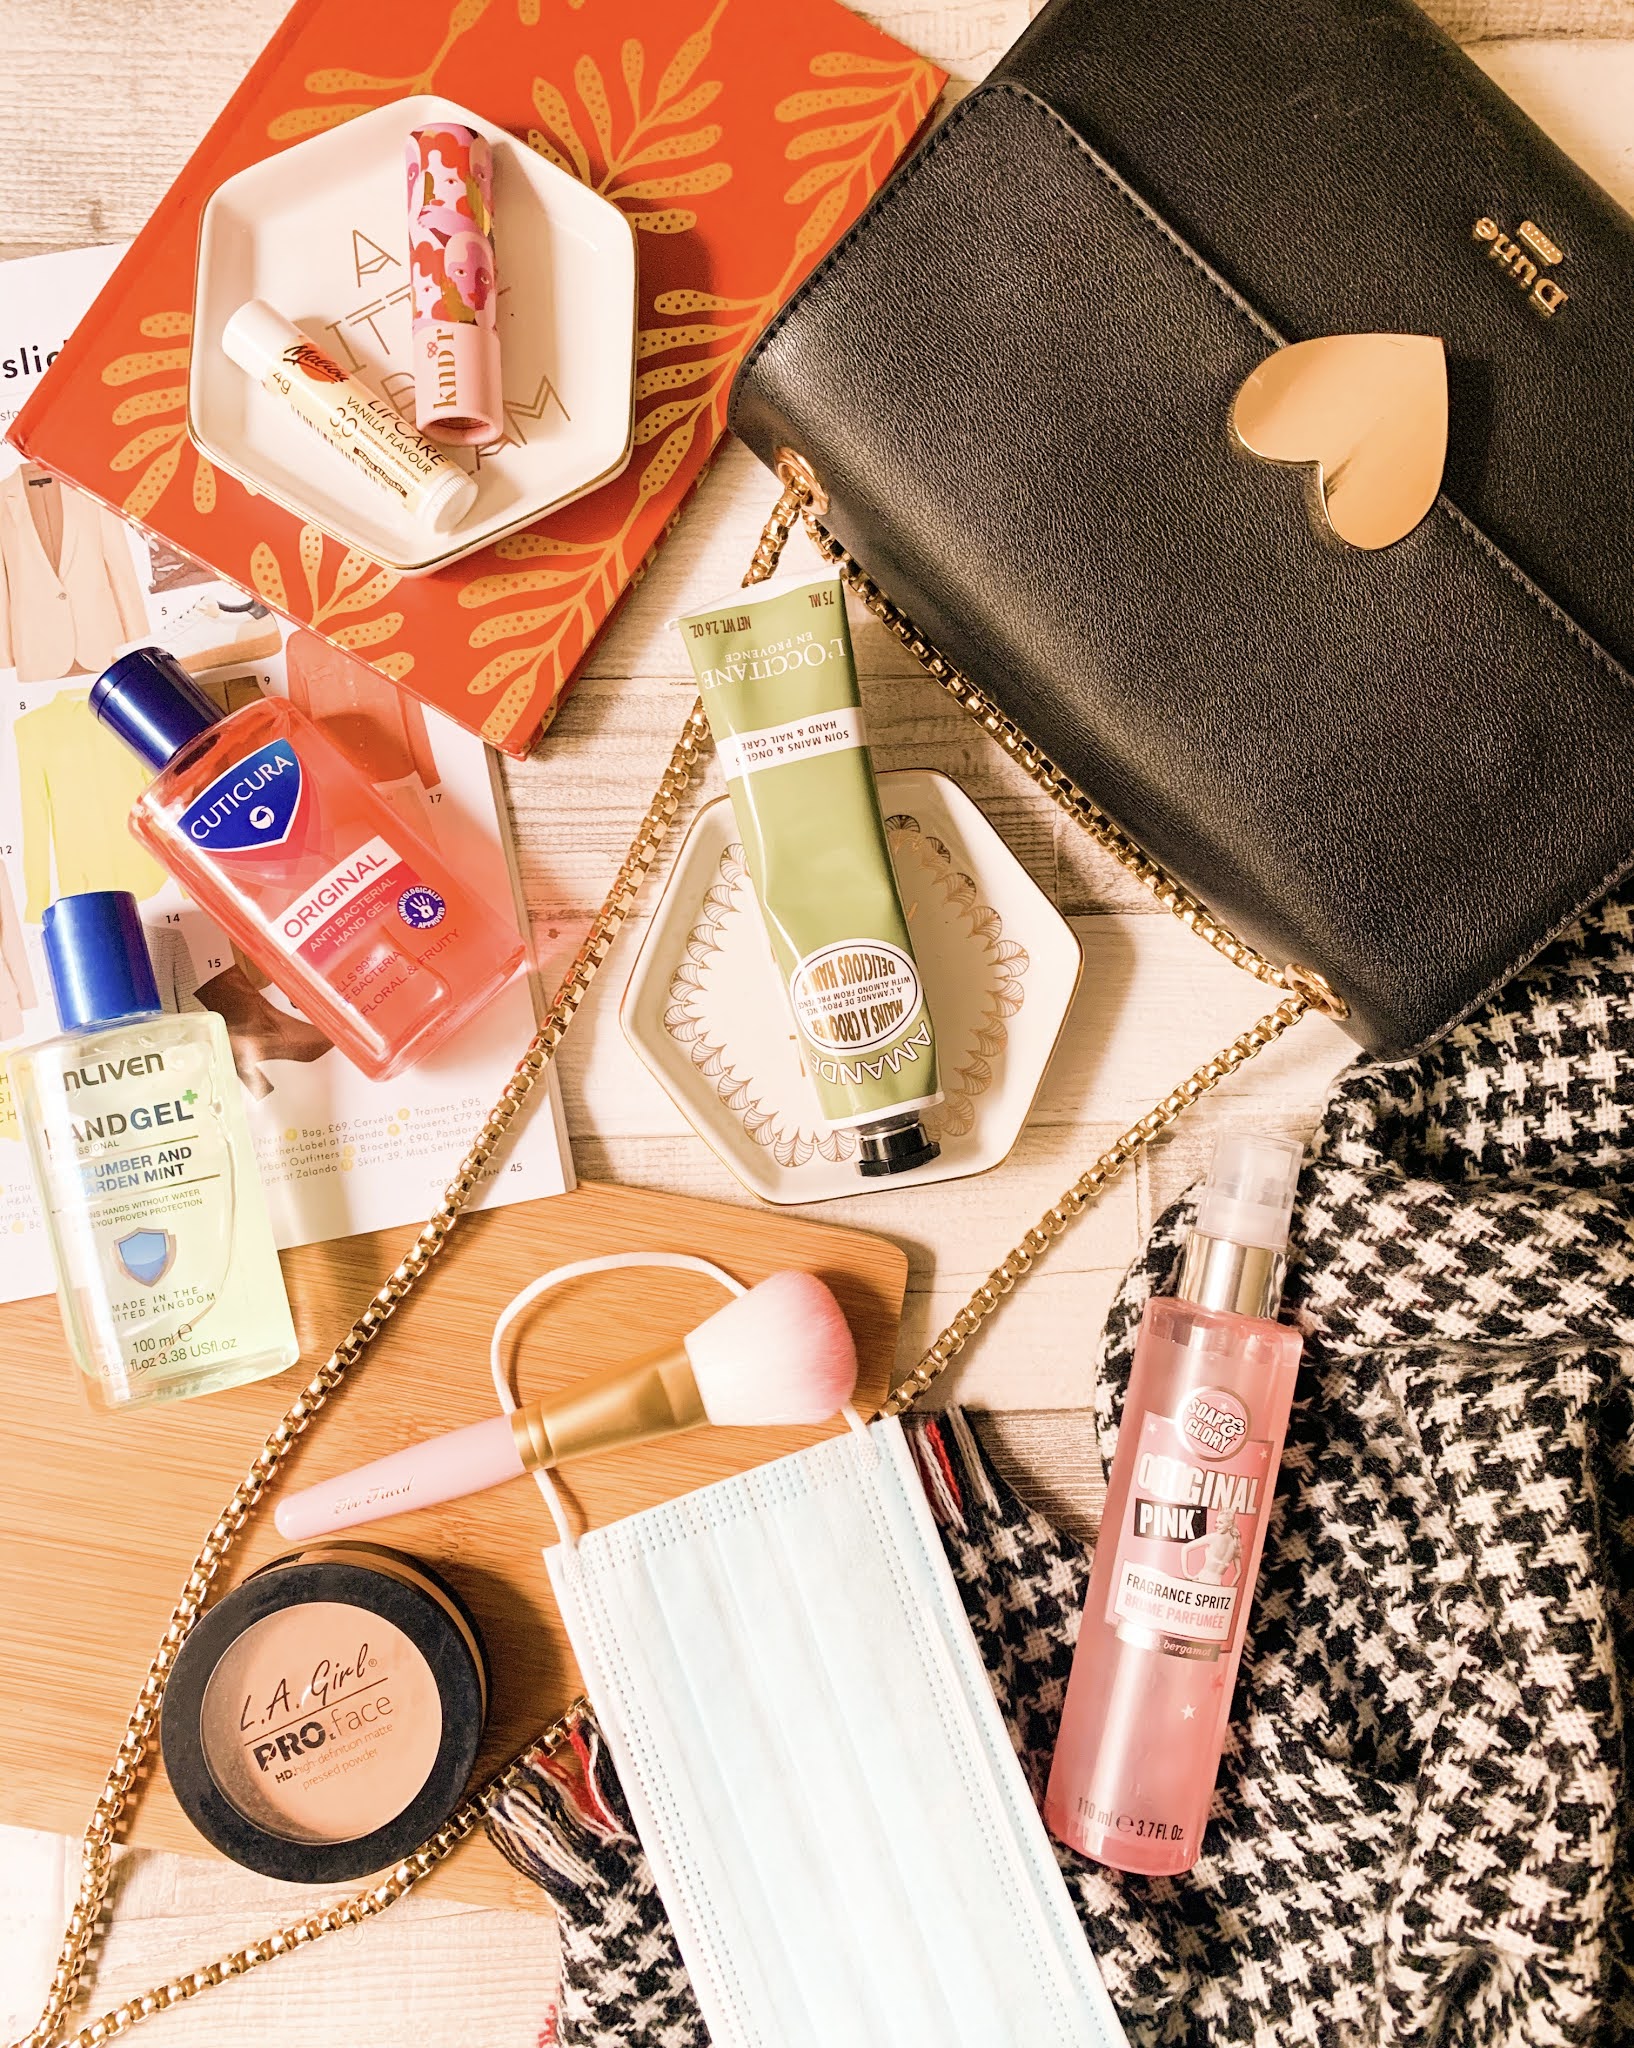 What's in My Bag - Work Edition - YesMissy